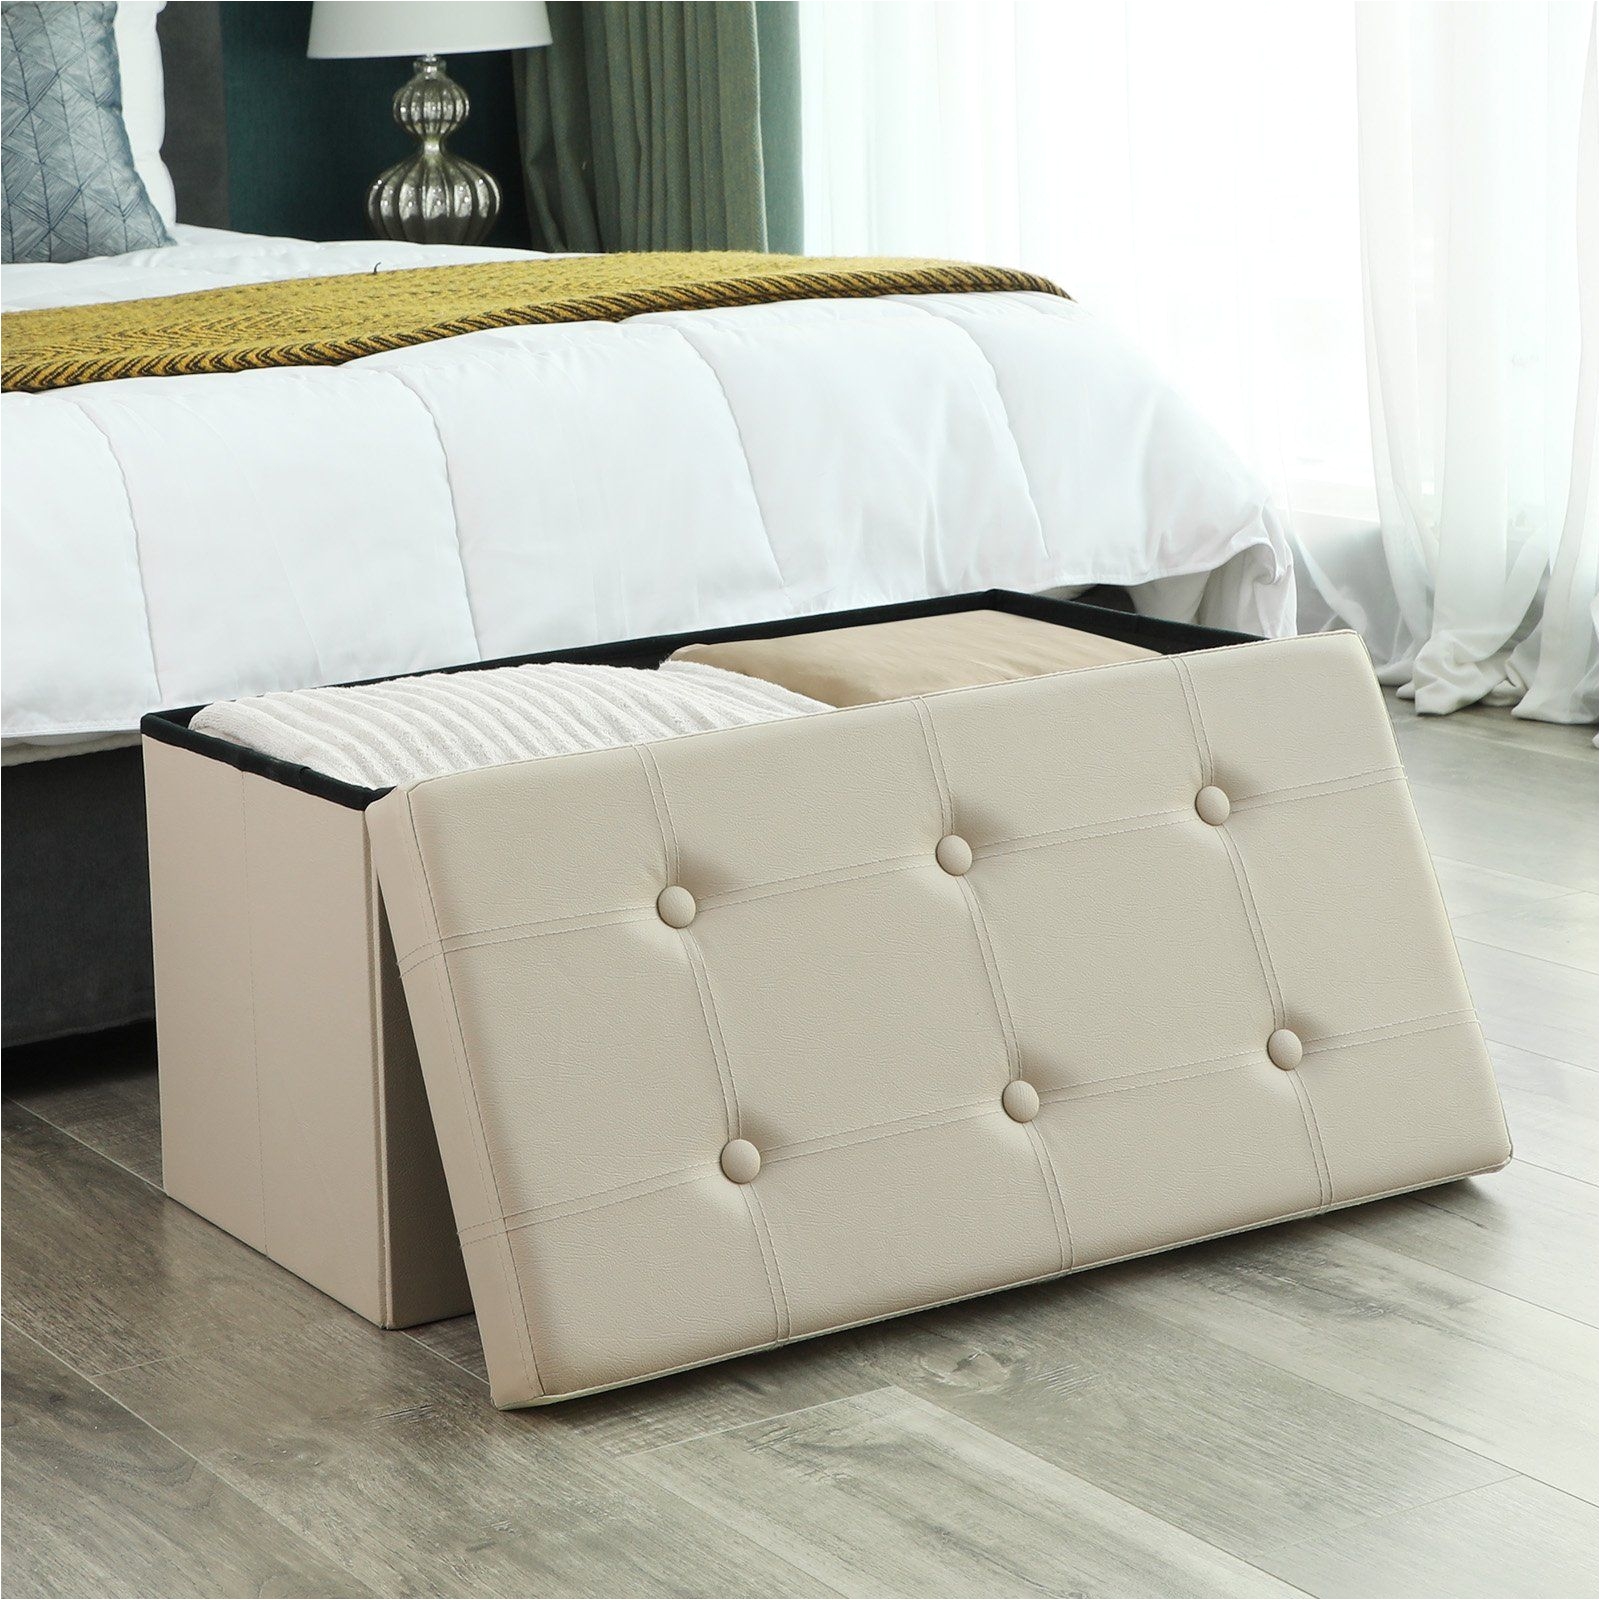 SONGMICS 30L Faux Leather Folding Storage Ottoman Bench Storage Chest Footrest Coffee Table